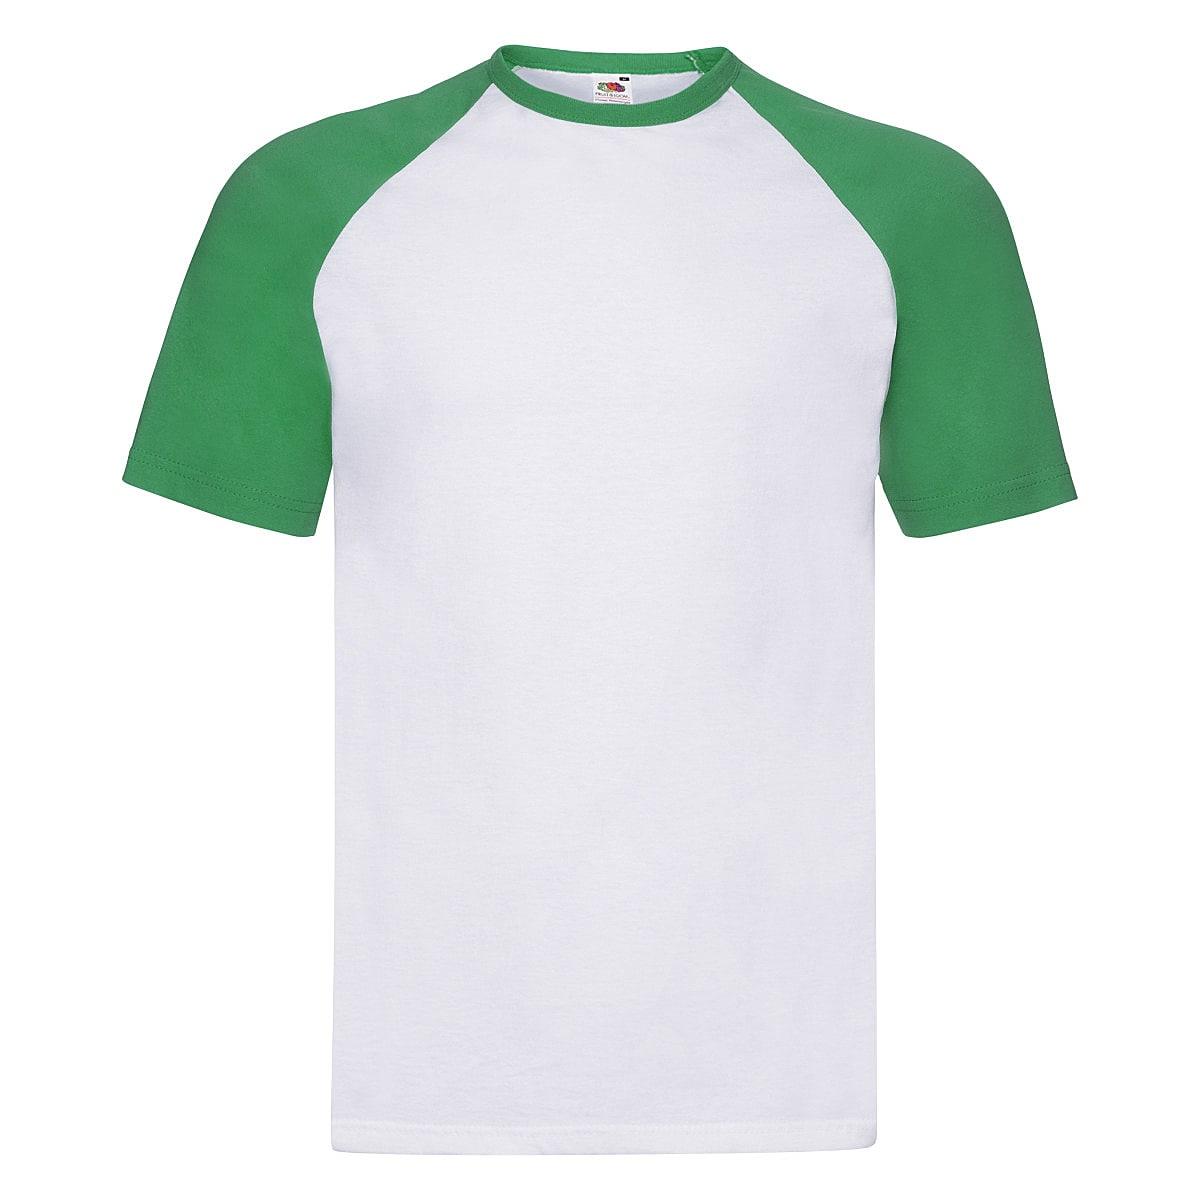 Fruit Of The Loom Short-Sleeve Baseball T-Shirt in White / Kelly Green (Product Code: 61026)